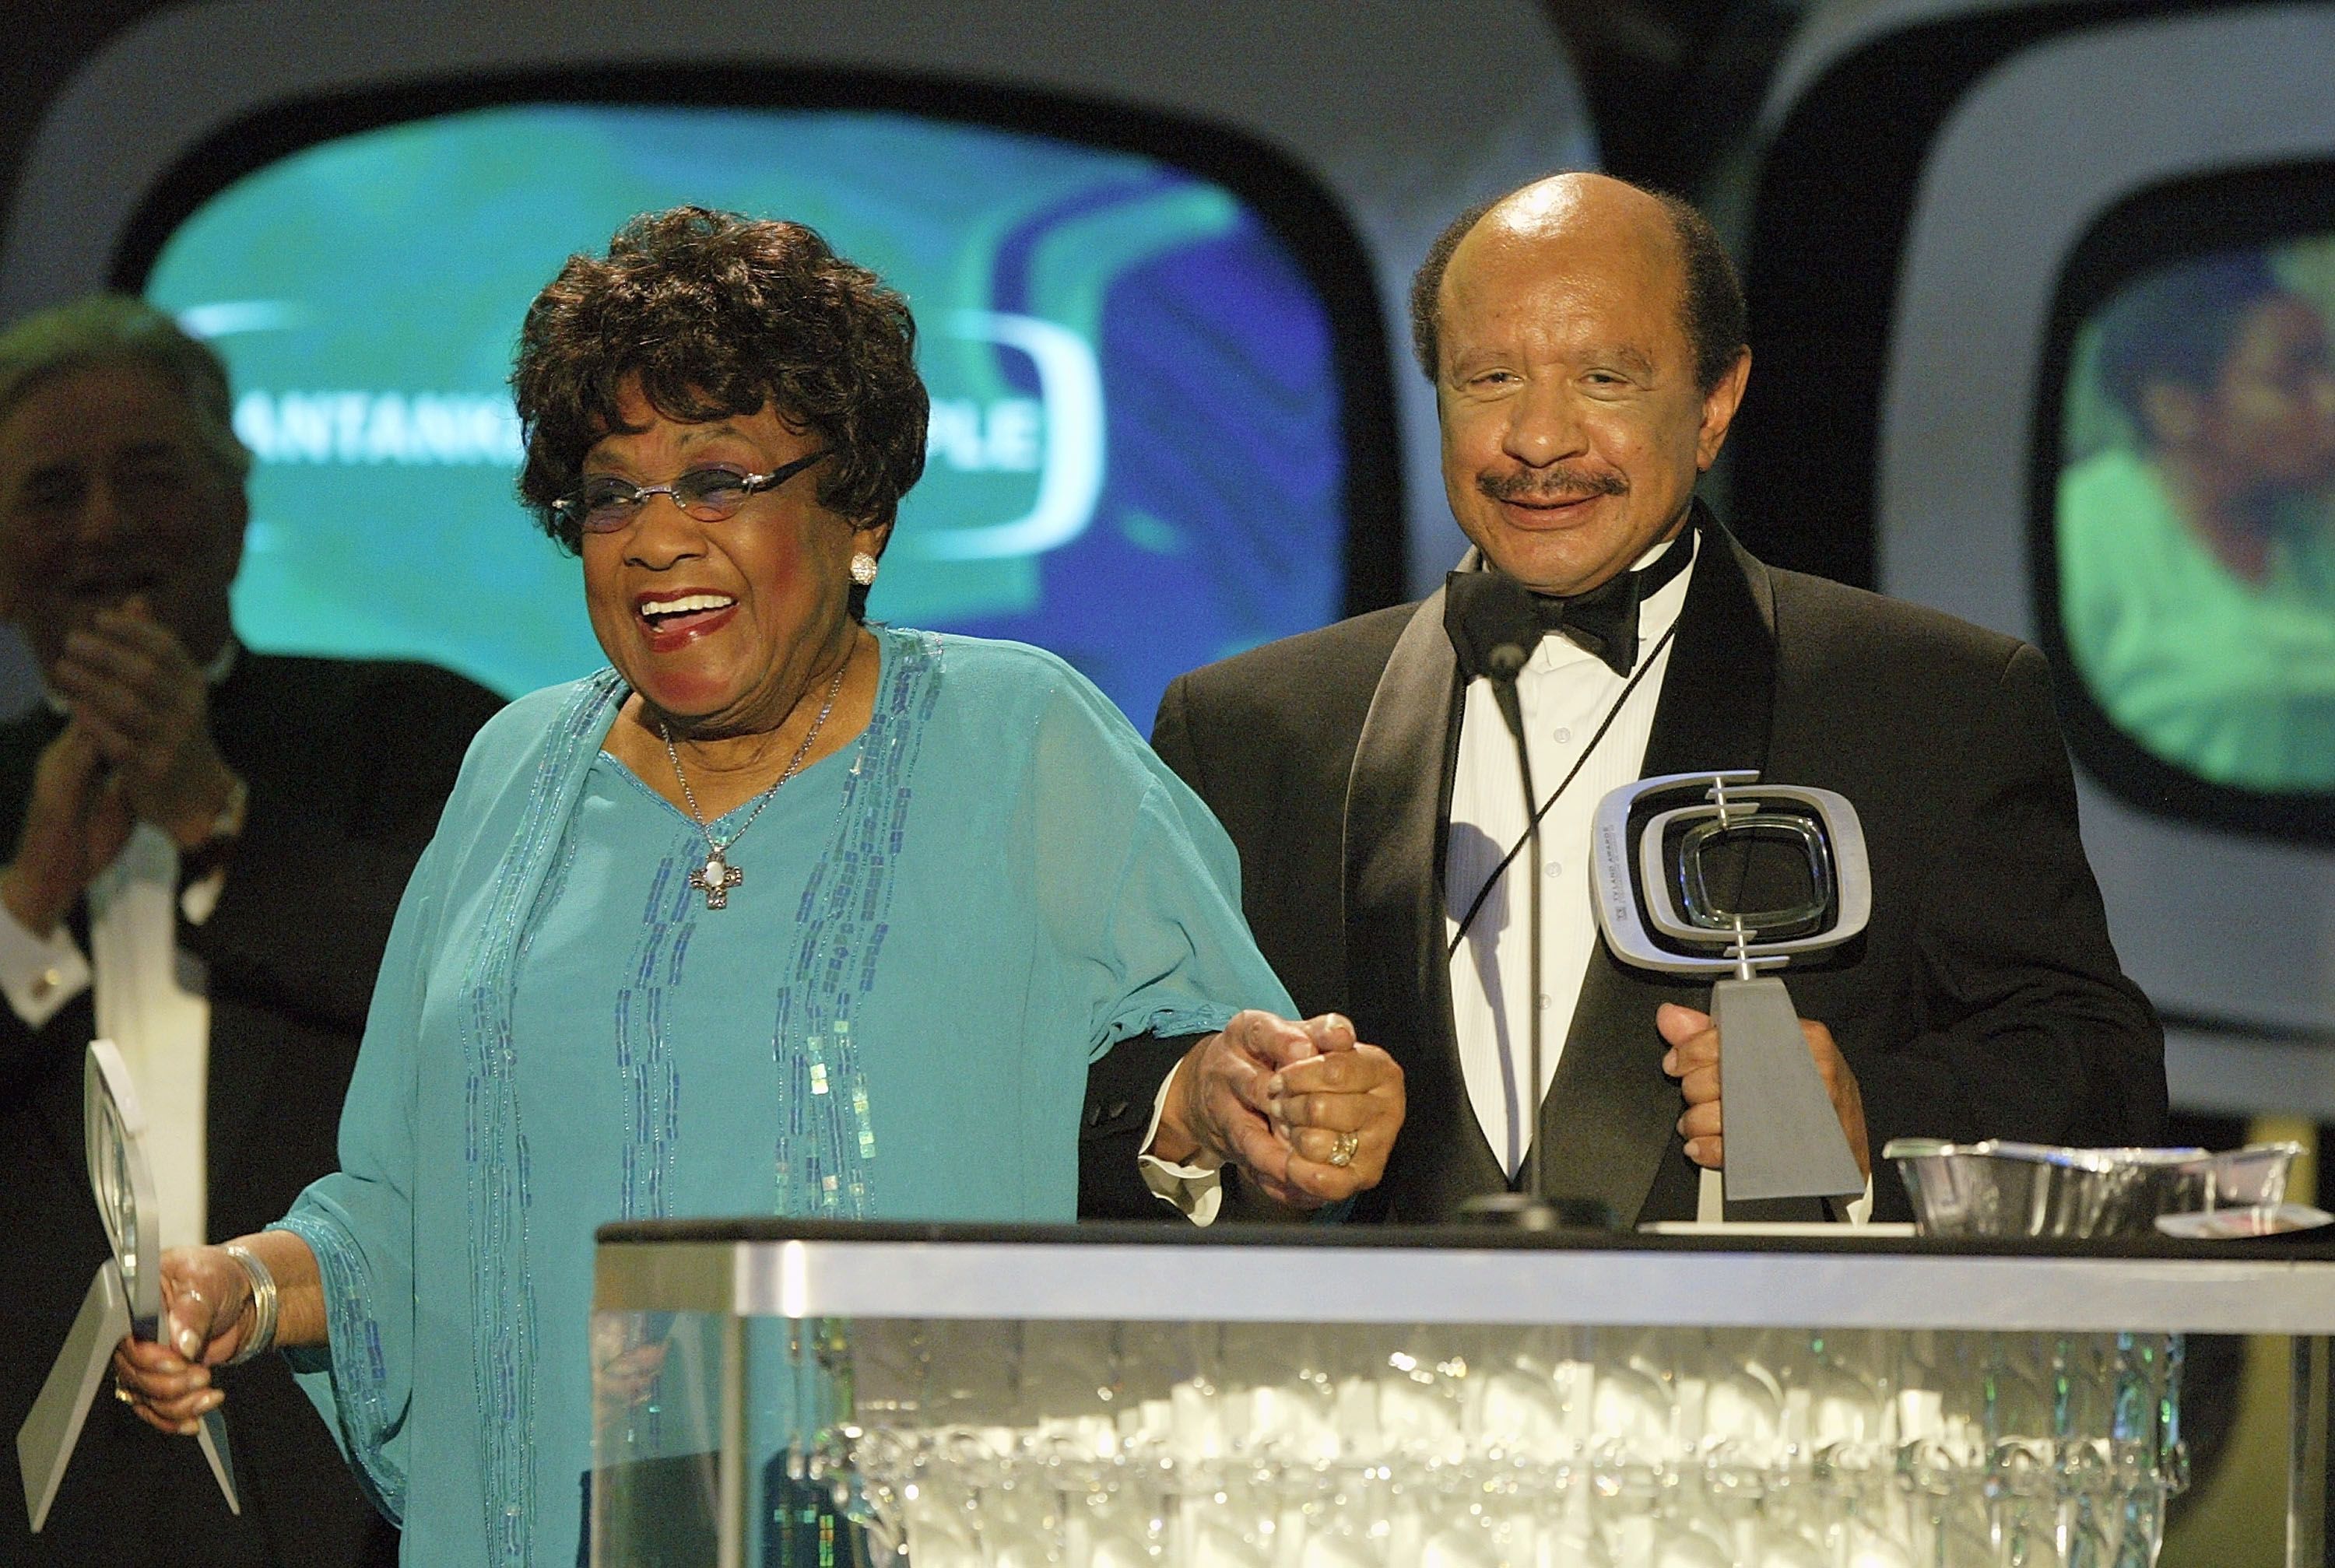 Isabel Sanford and Sherman Hemsley at the 2nd Annual TV Land Awards at The Hollywood Palladium, in Hollywood, California | Photo: Kevin Winter/Getty Images